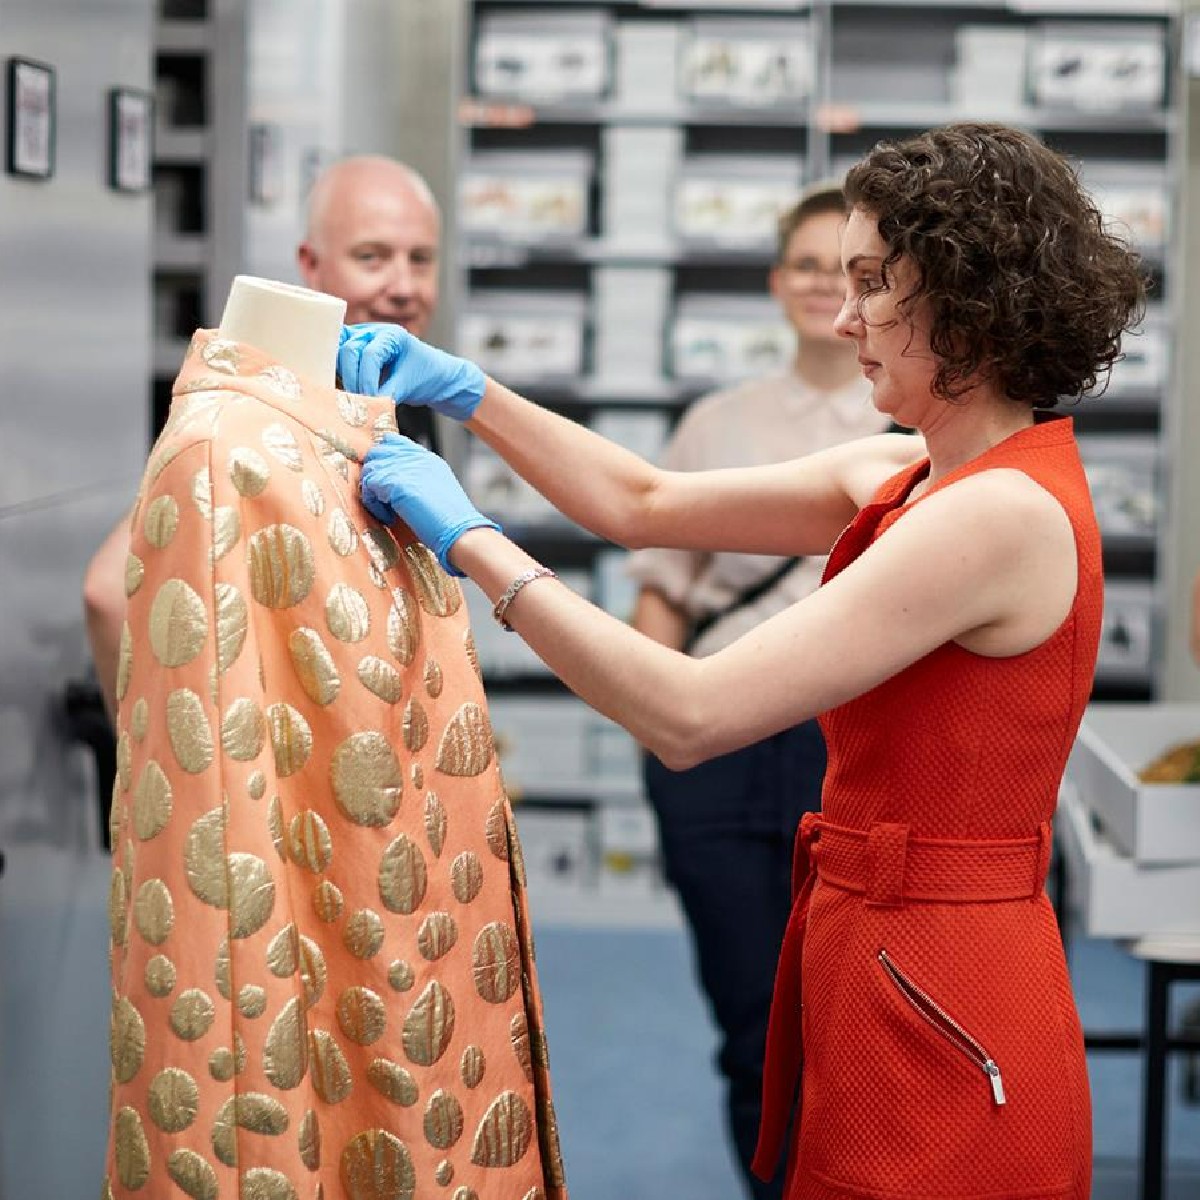 We are excited to announce @museumsvictoria Fashion Collection Back Stage Pass, as part of the PayPal Melbourne Fashion Festival's Fashion Culture Program. Join a behind-the-scenes tour that showcases female innovation in the collection. 🧵 #PayPalMFF 🎟️ fal.cn/3vFzS